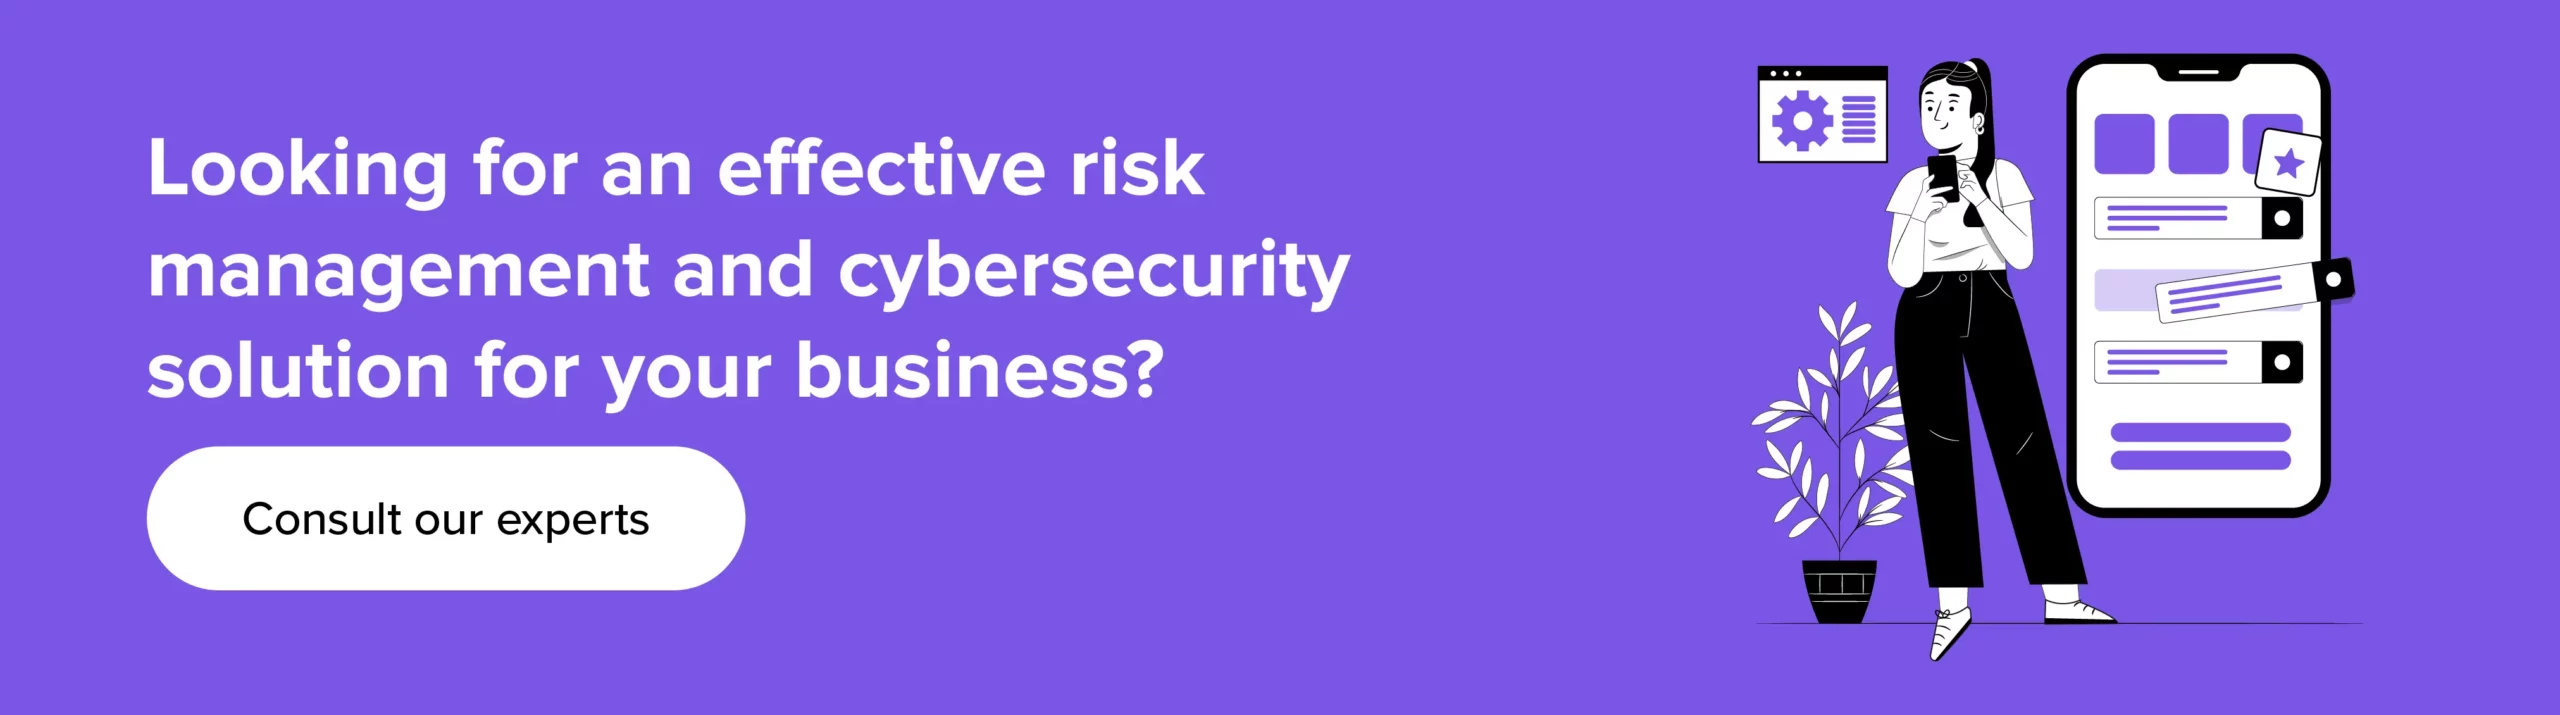 Get risk management and cybersecurity solution for your business